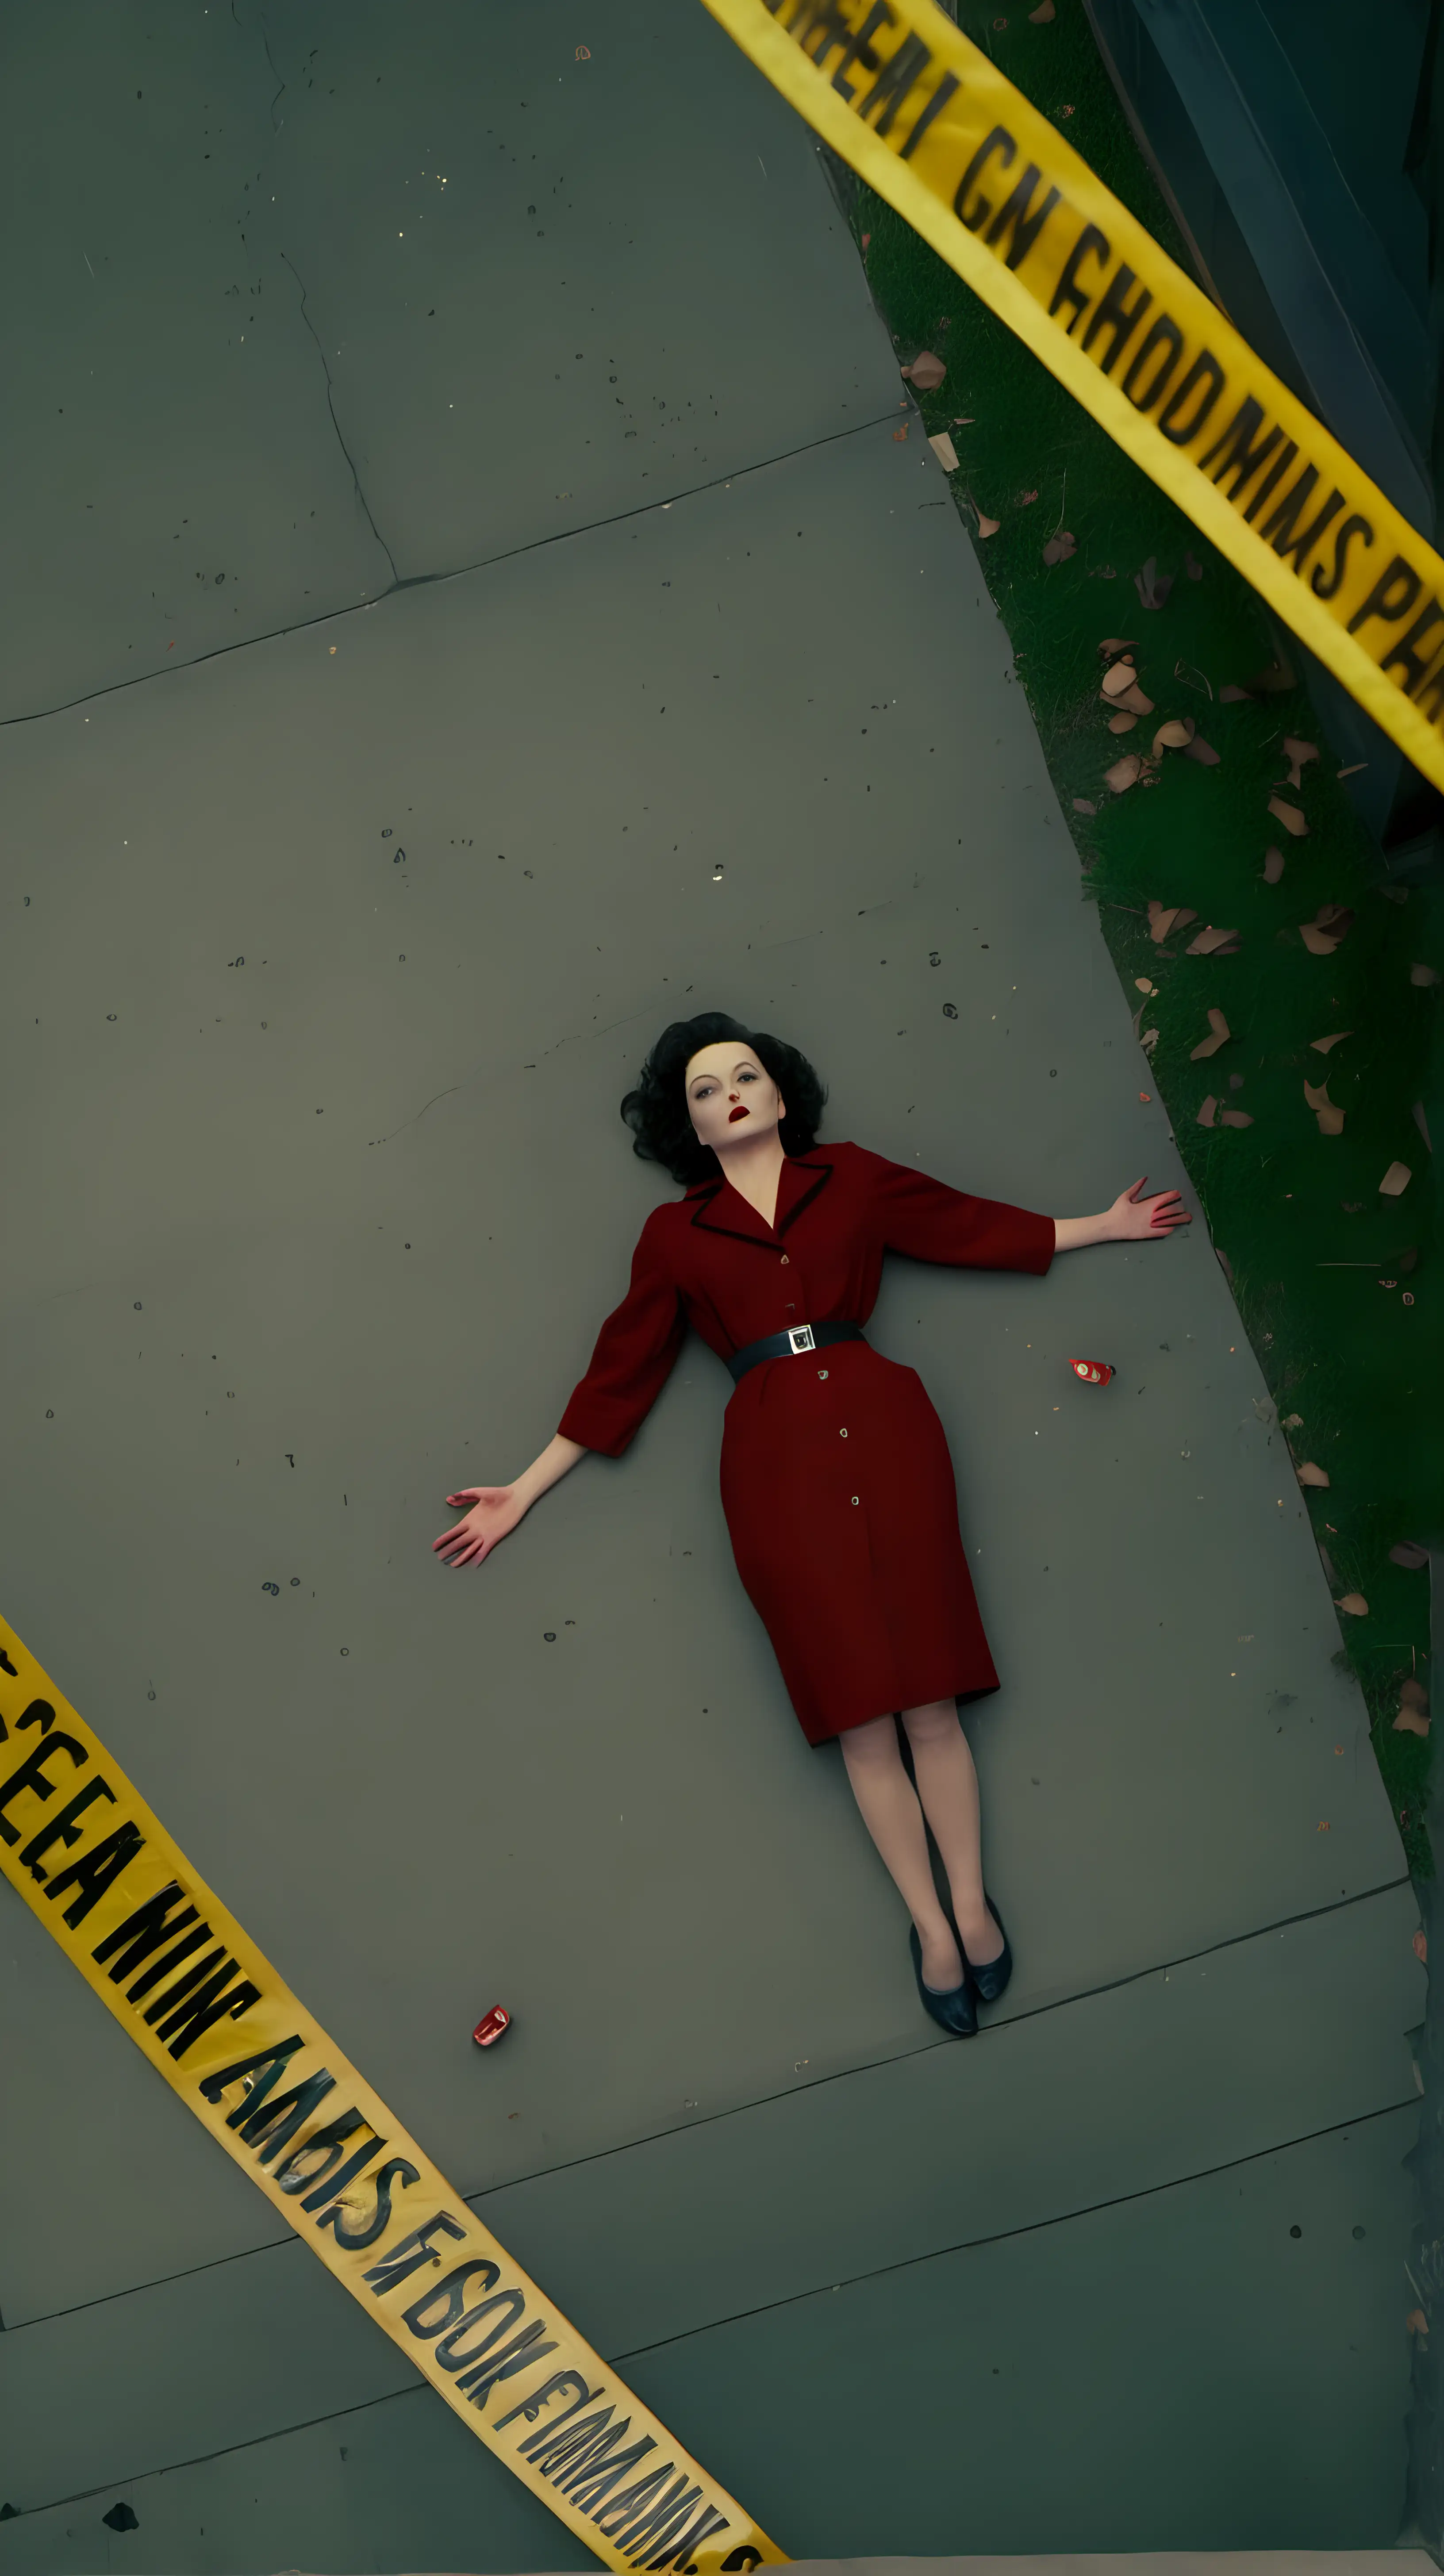 Birds Eye view from a building, a retro woman lays dead on the sidewalk as if she has fallen from the building. cinematography, cinematic lighting, surreal, Amelie, twin peaks, caution tape